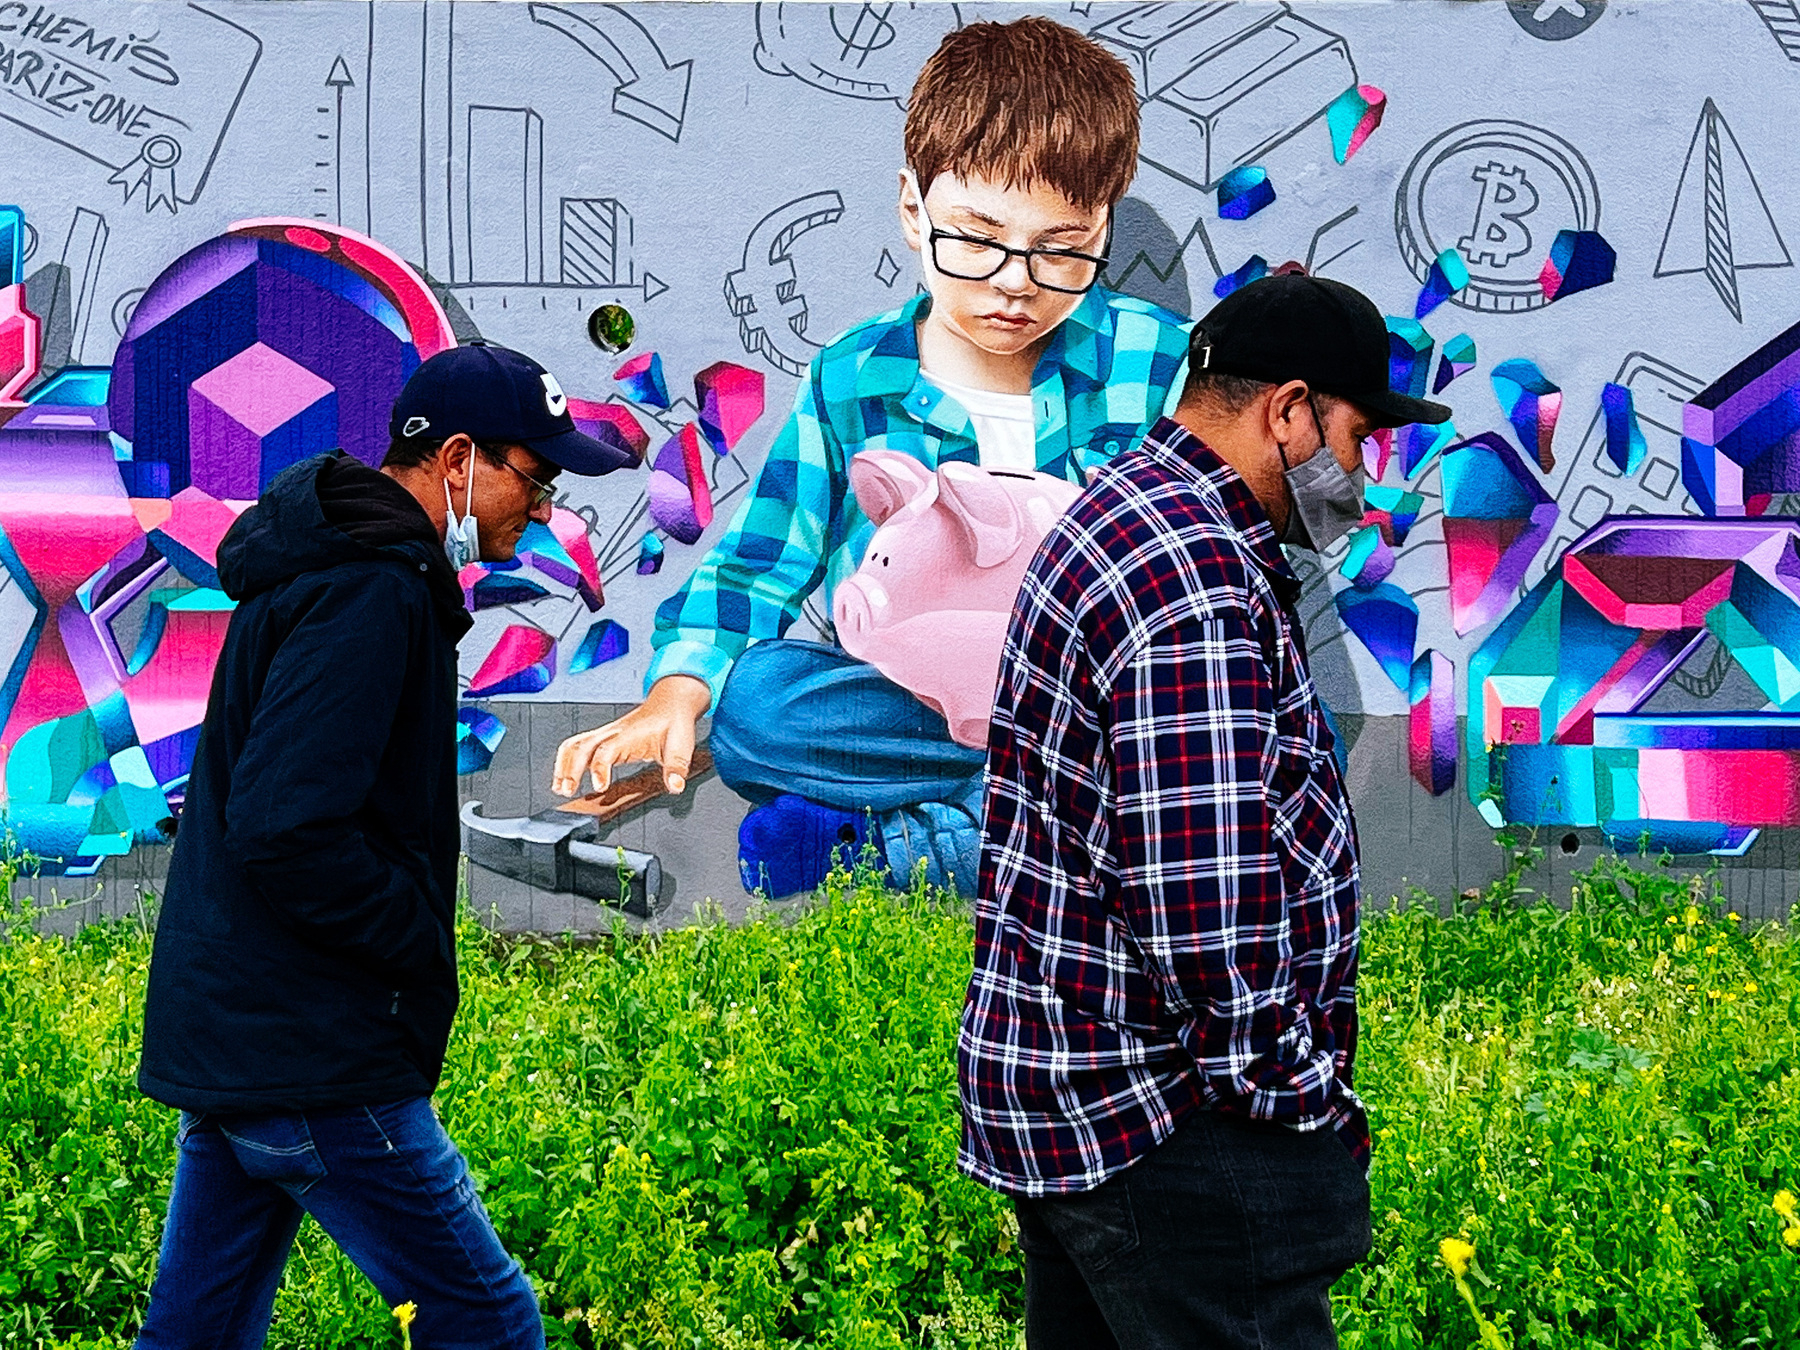 two men walk by a street art piece showing a kid holding a hammer, looking at a piggy bank. next to him are several signs, including one for bitcoin.